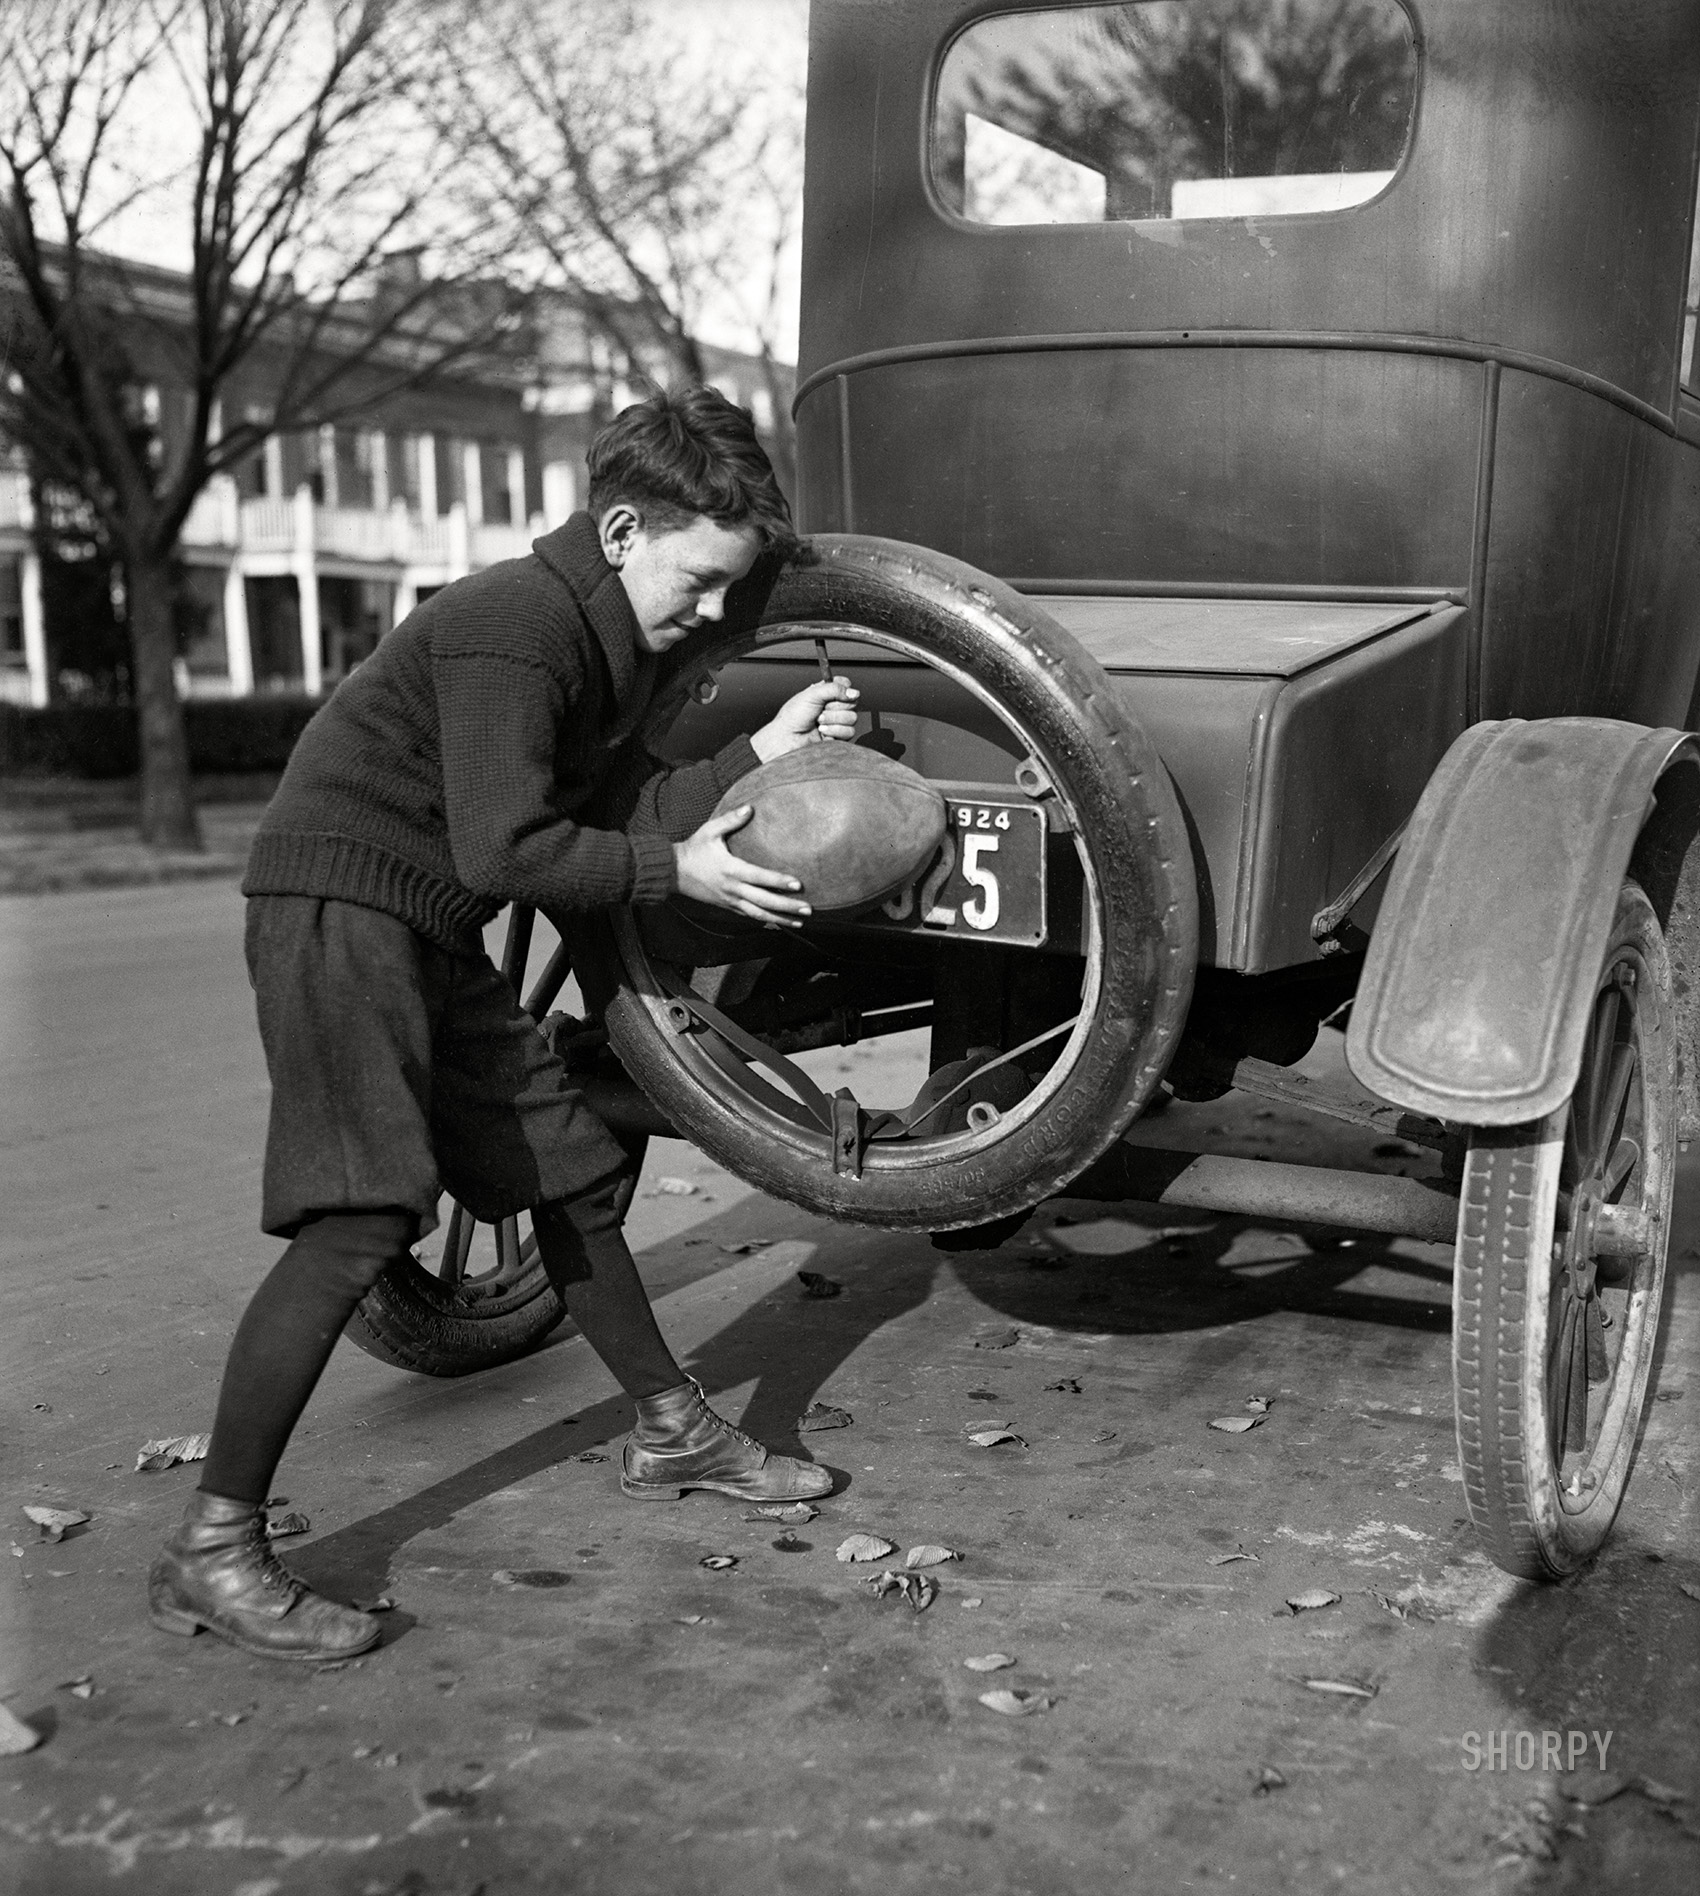 Washington, D.C., 1924. "Flat spare tires are numerous around Washington these days due to the youthful football players who have found an easier way to inflate the pigskin than using their lungs. 'Billy' Friel shown inflating his football." 4x5 inch glass negative. View full size.